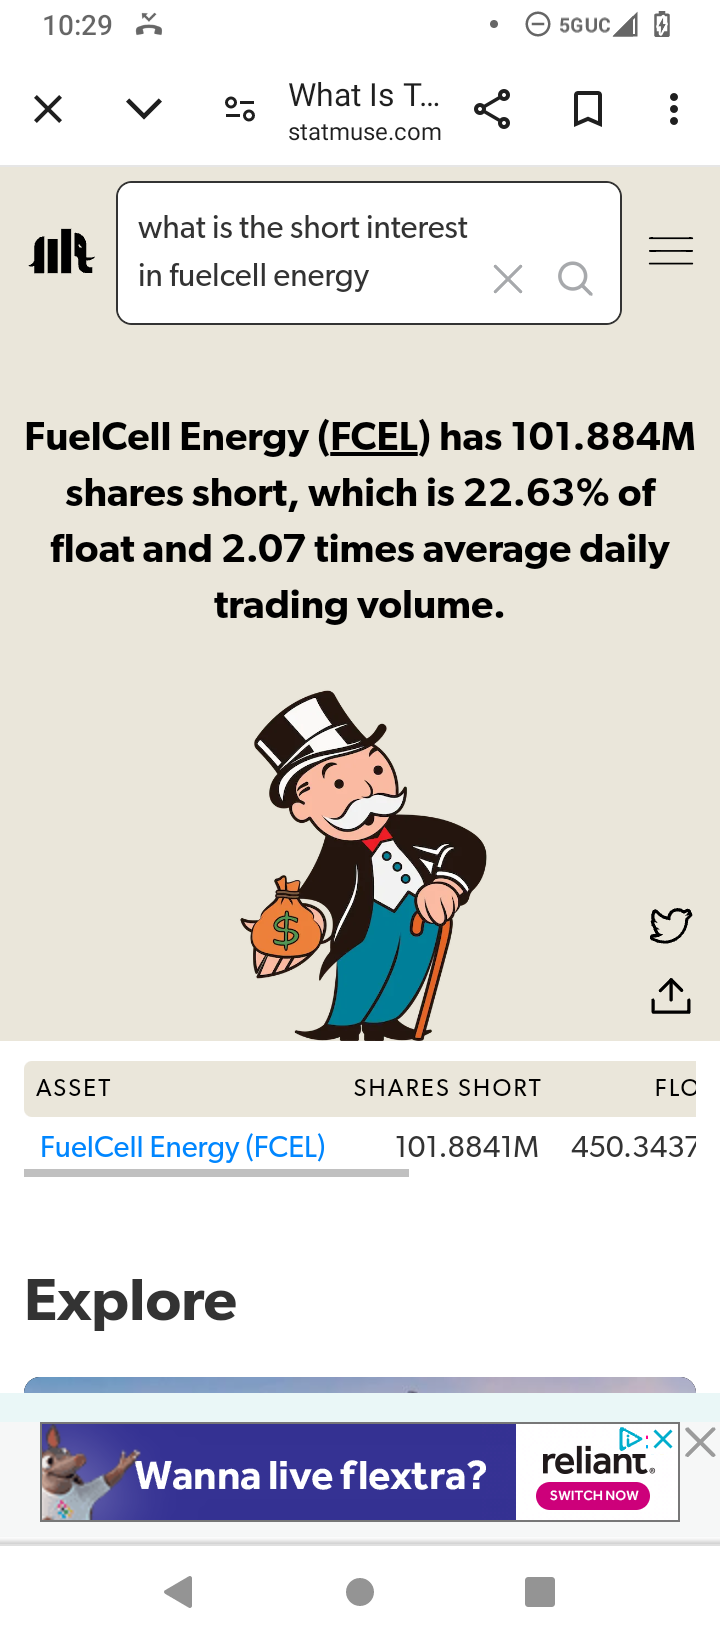 $FuelCell Energy (FCEL.US)$